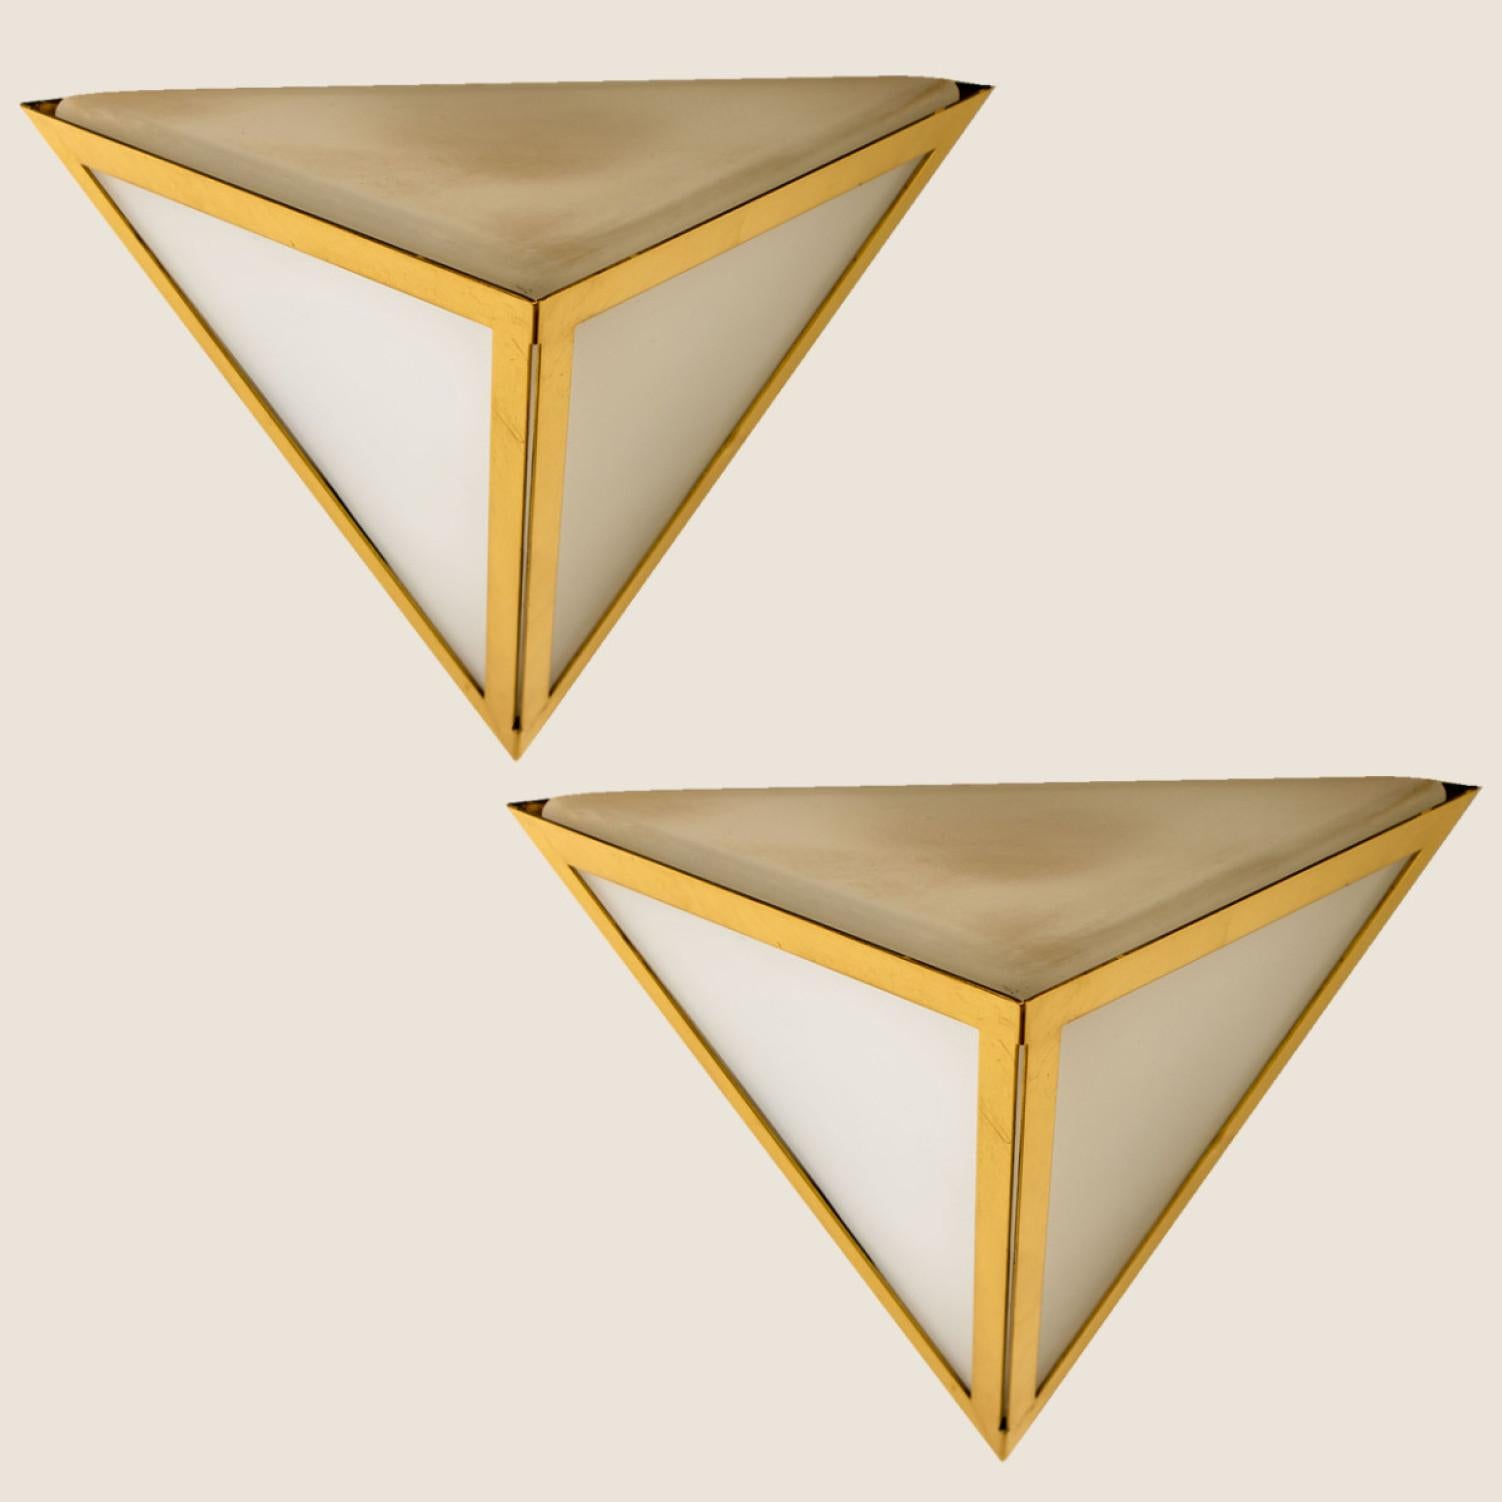 Triangle shaped wall lights in white opaline glass with brass details. Manufactured by Glashütte Limburg in Germany during the 1970s. (early 1970s). Nice craftsmanship. Minimal, geometric and simply shaped design.

Please note the price is for one